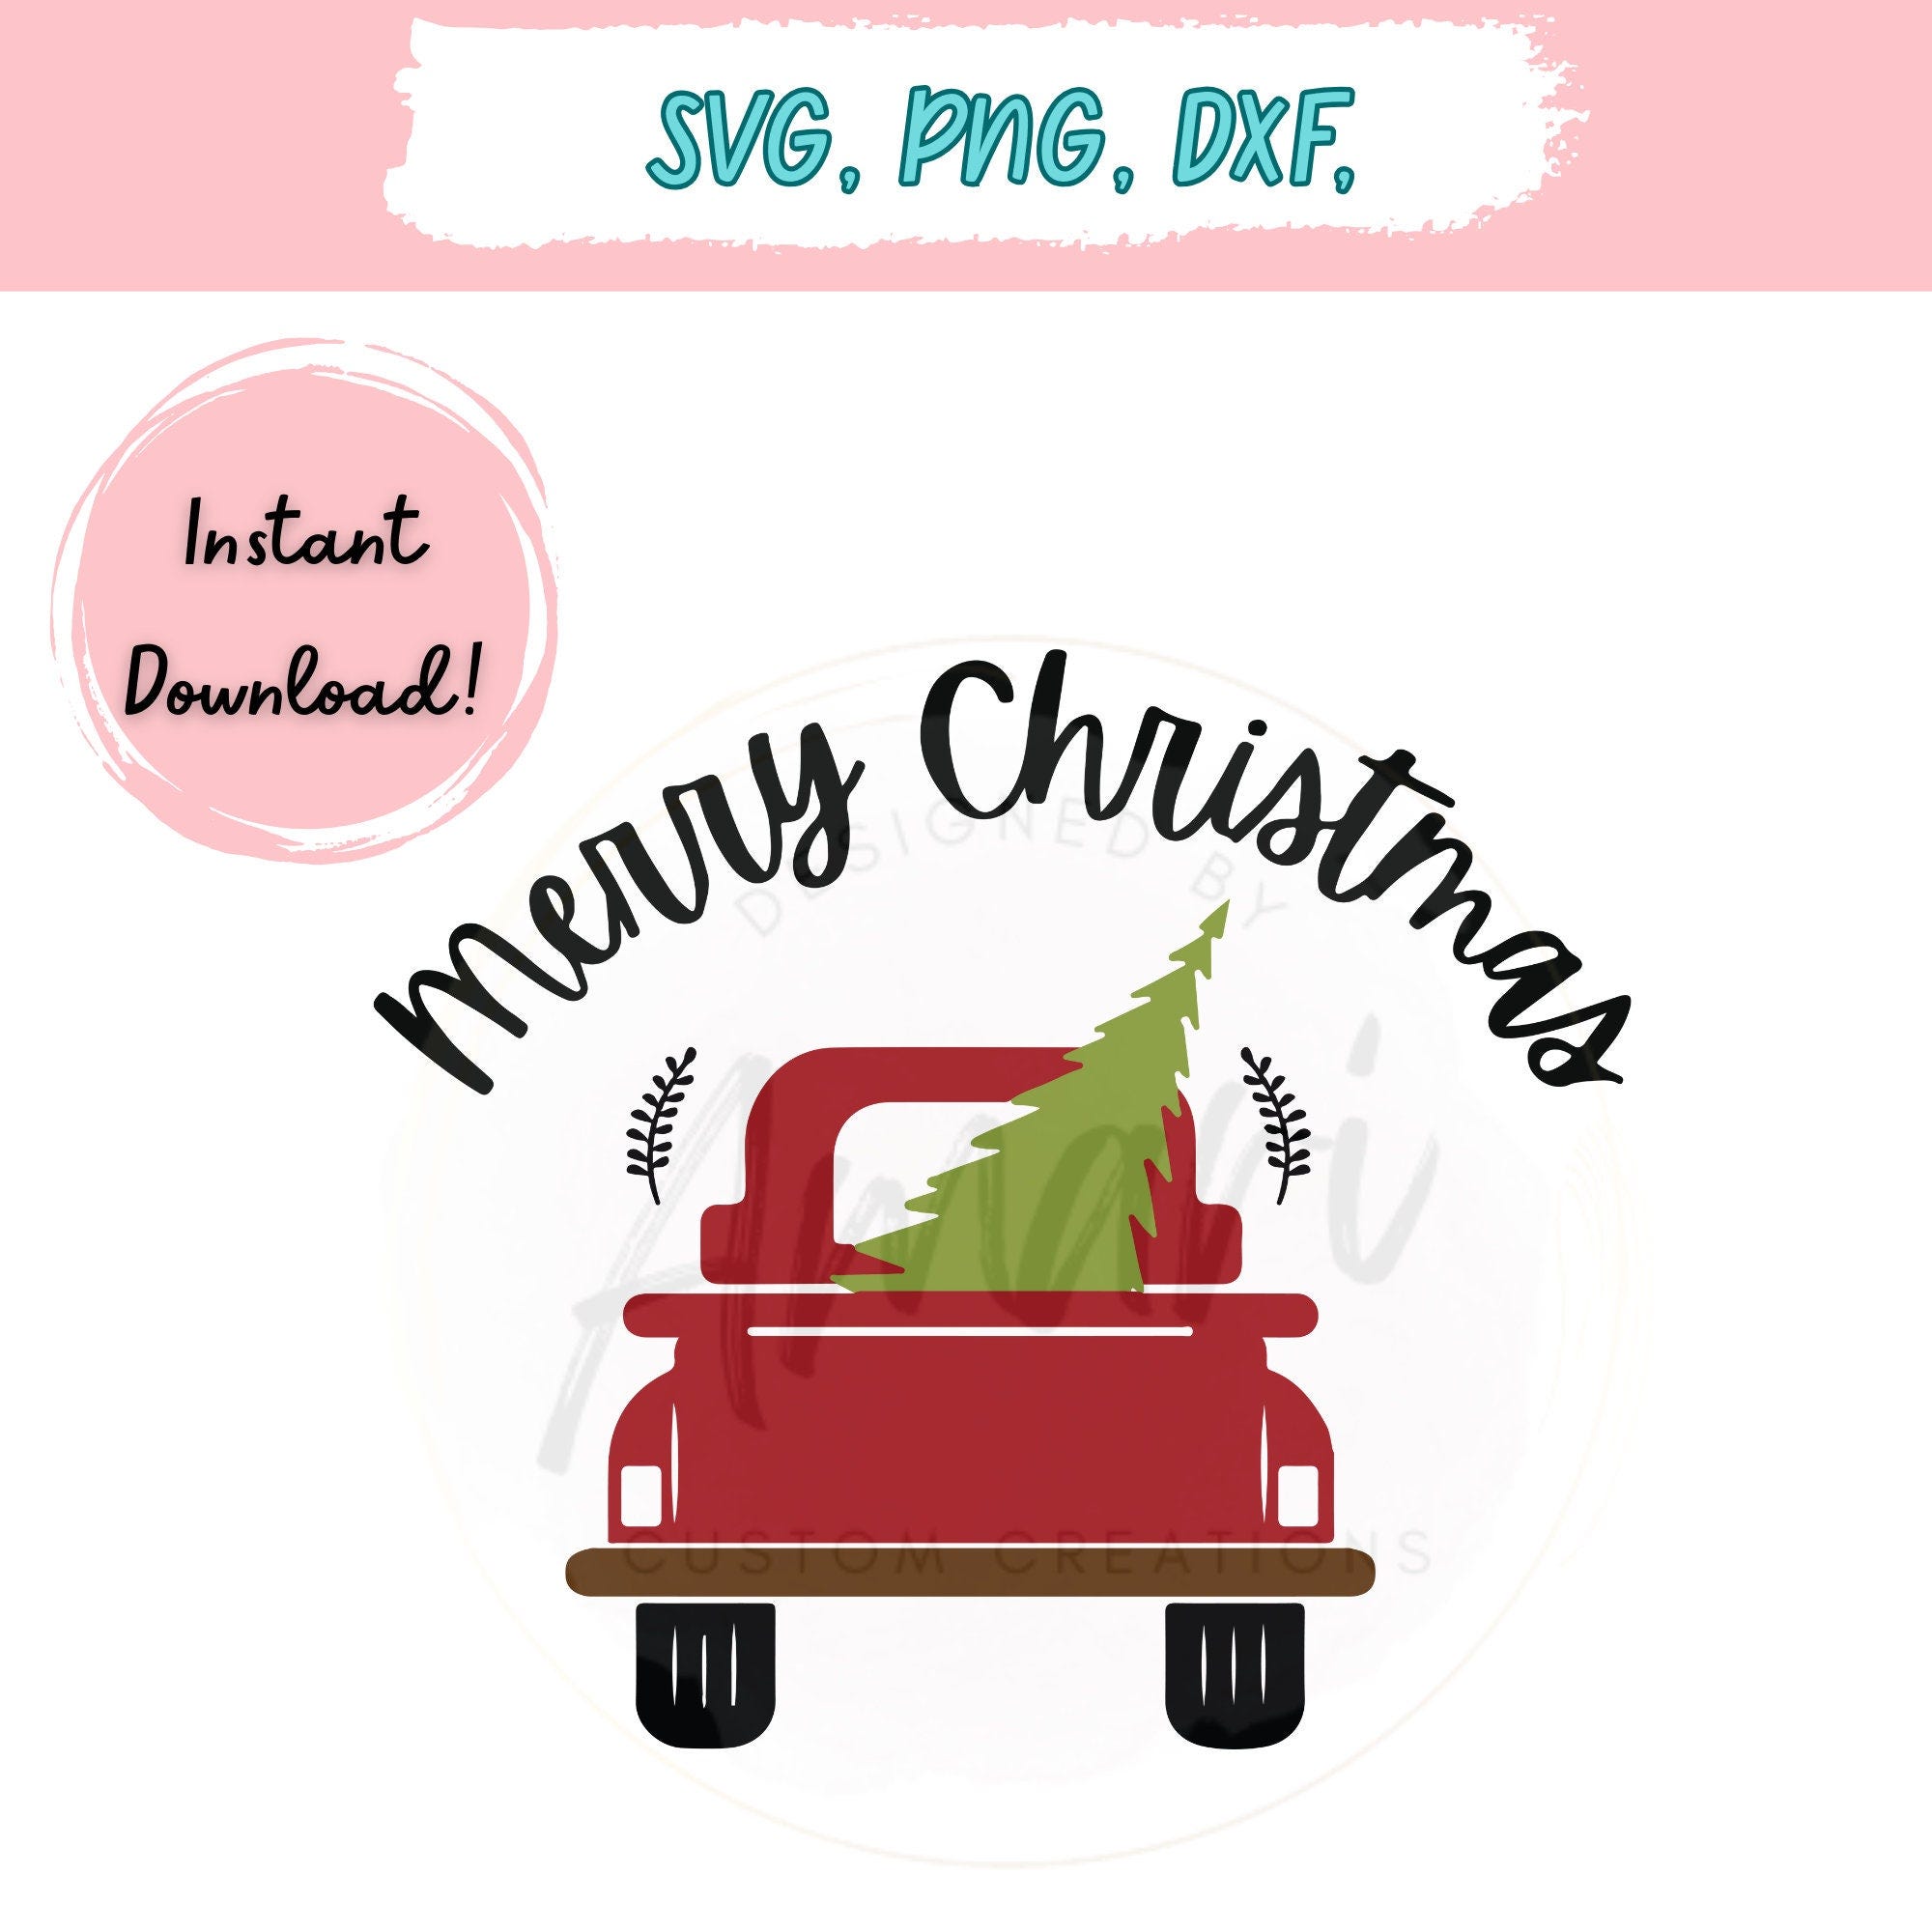 Christmas tree truck svg, Retro Christmas Pickup Truck Cut File, Cricut File, Glow forge File, Merry Christmas SVG, PNG, DXF